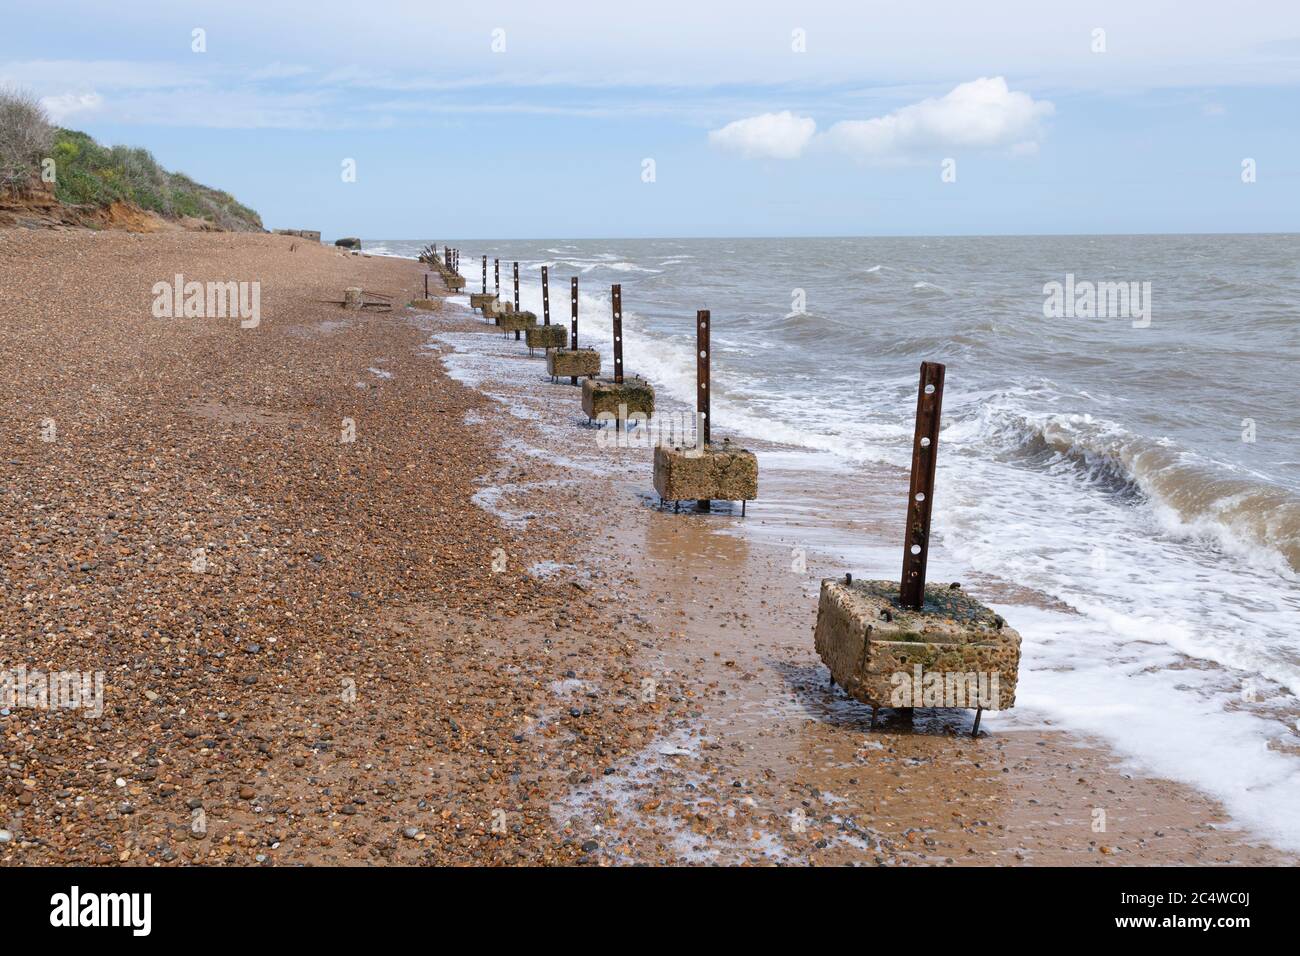 Remnants of old wartime coastal defences 1940s anti-invasion military structures, Bawdsey, Suffolk, England, UK Stock Photo